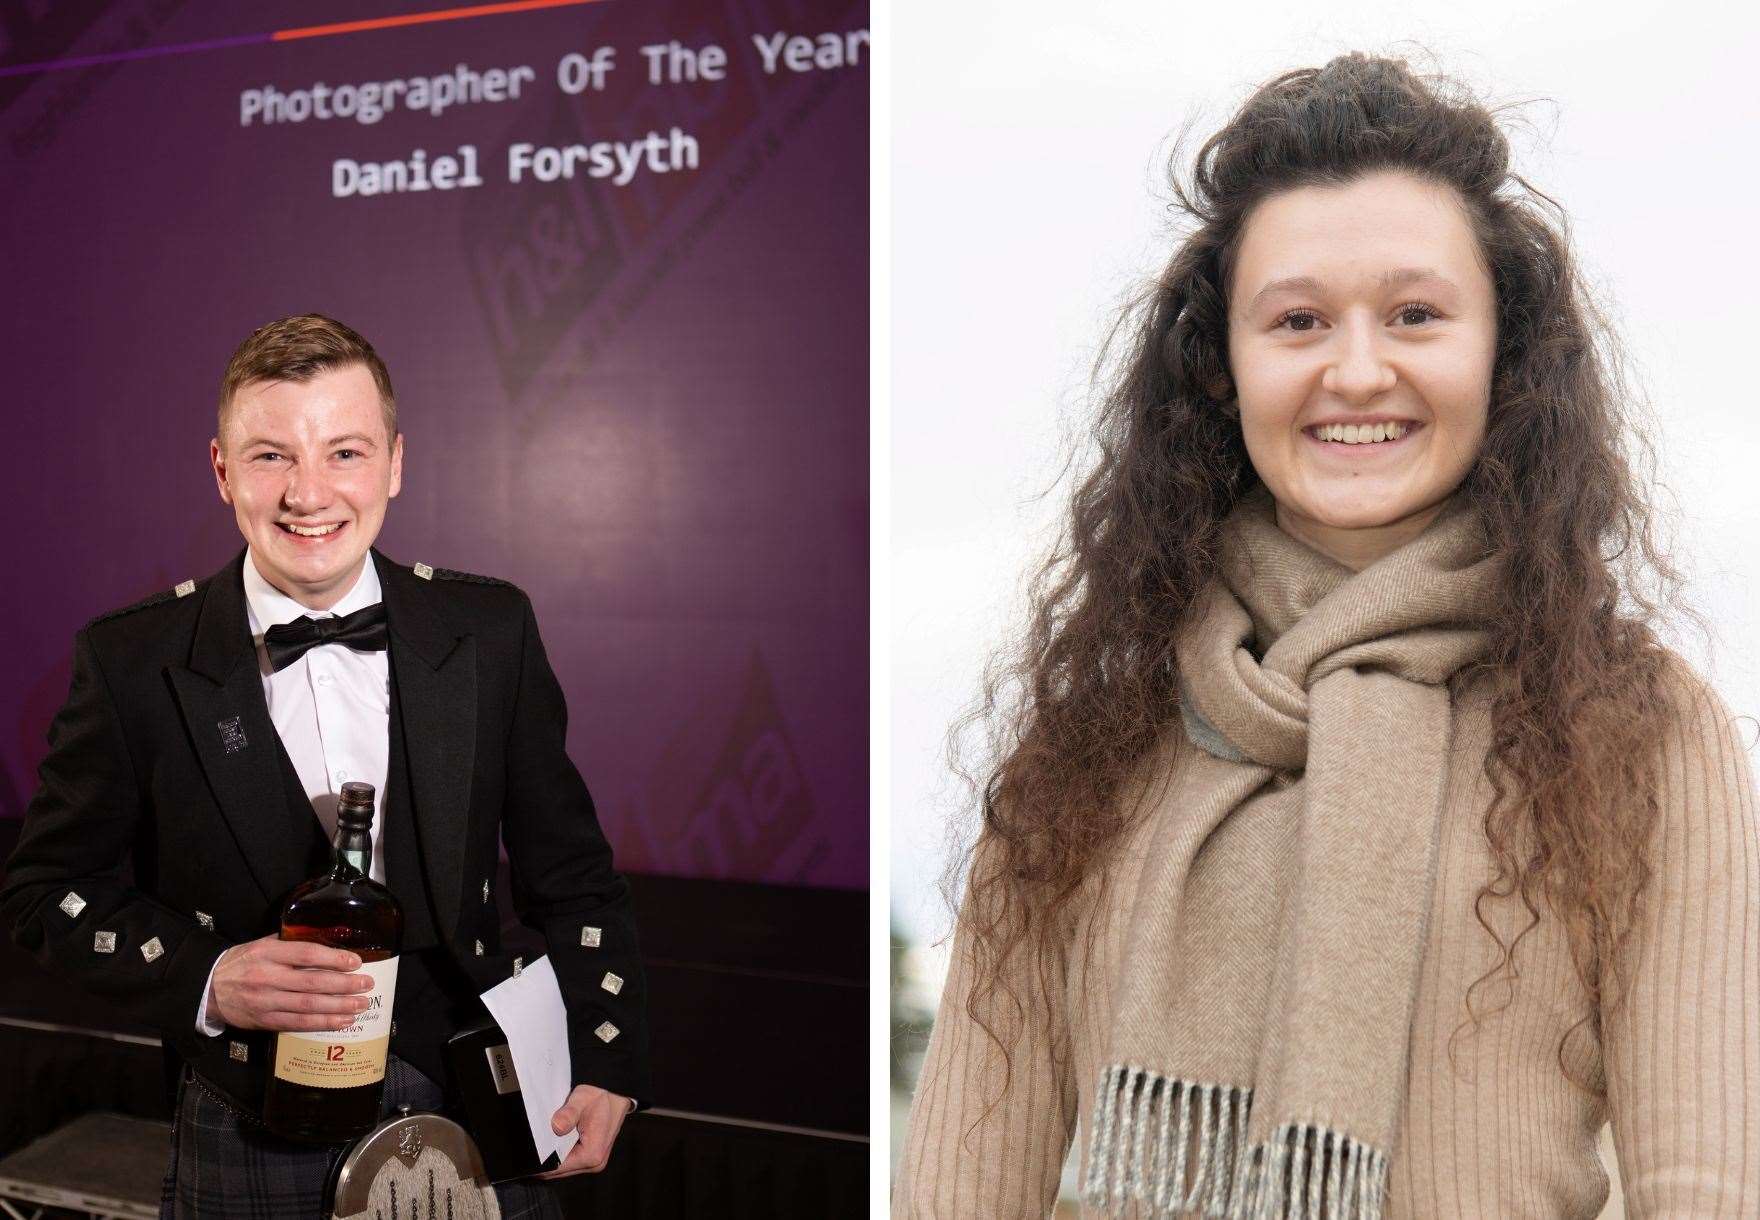 Northern Scot photographers Daniel Forsyth and Beth Taylor are up for Photographer of the Year.